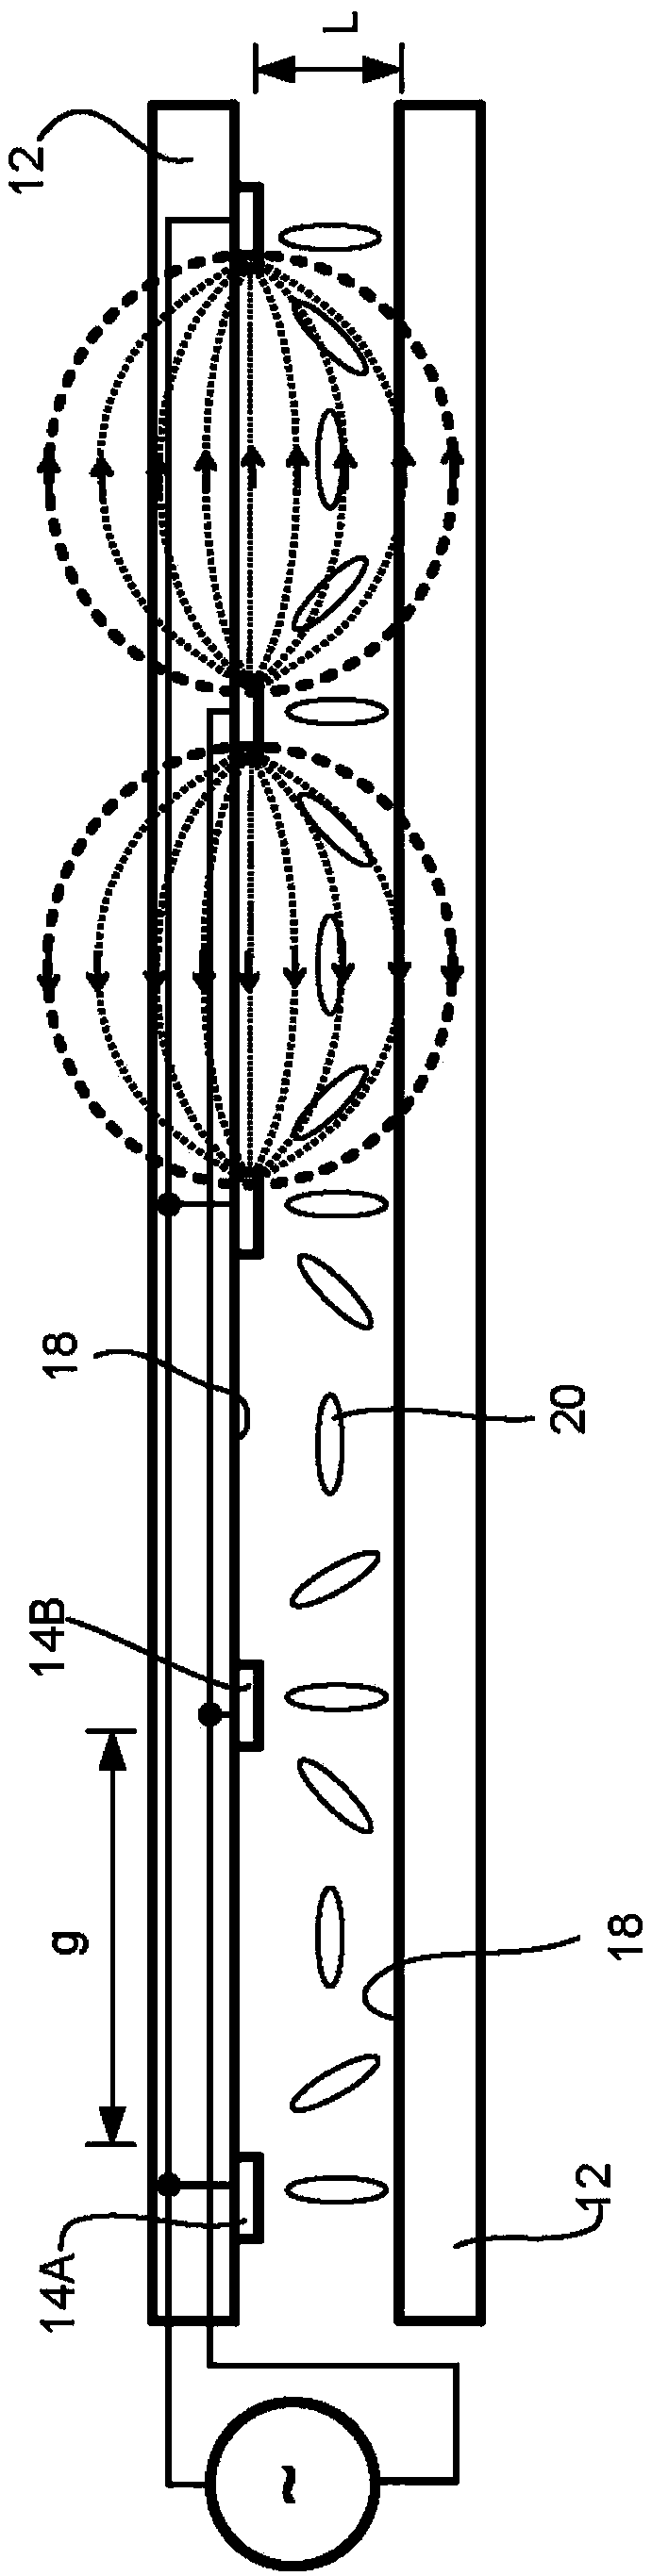 Liquid crystal beam control device and manufacture